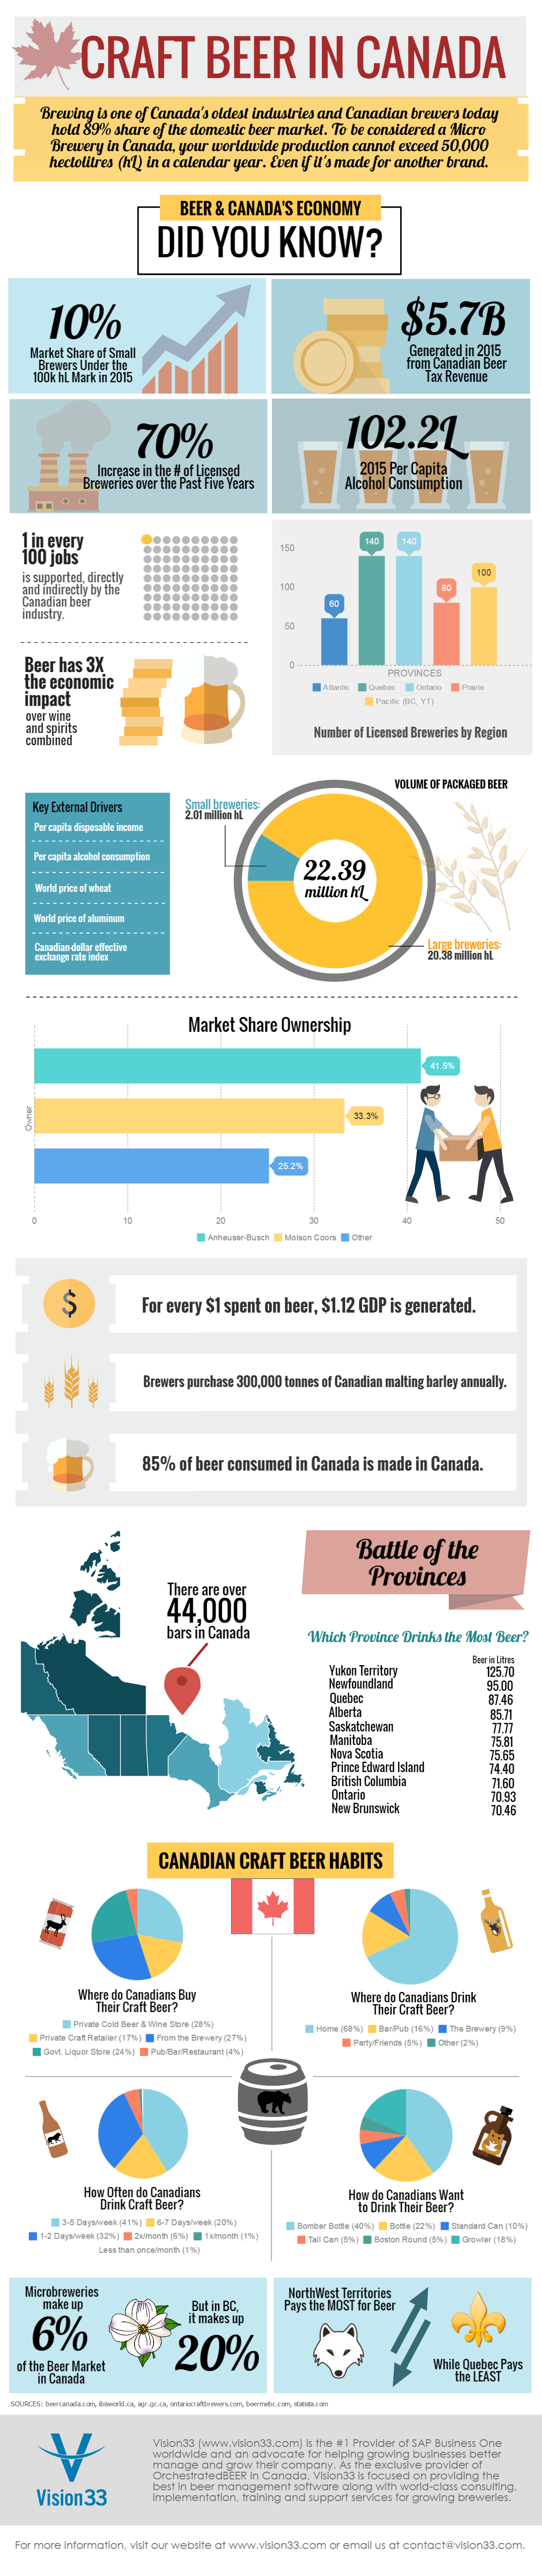 Craft Beer in Canada - Industry Infographic